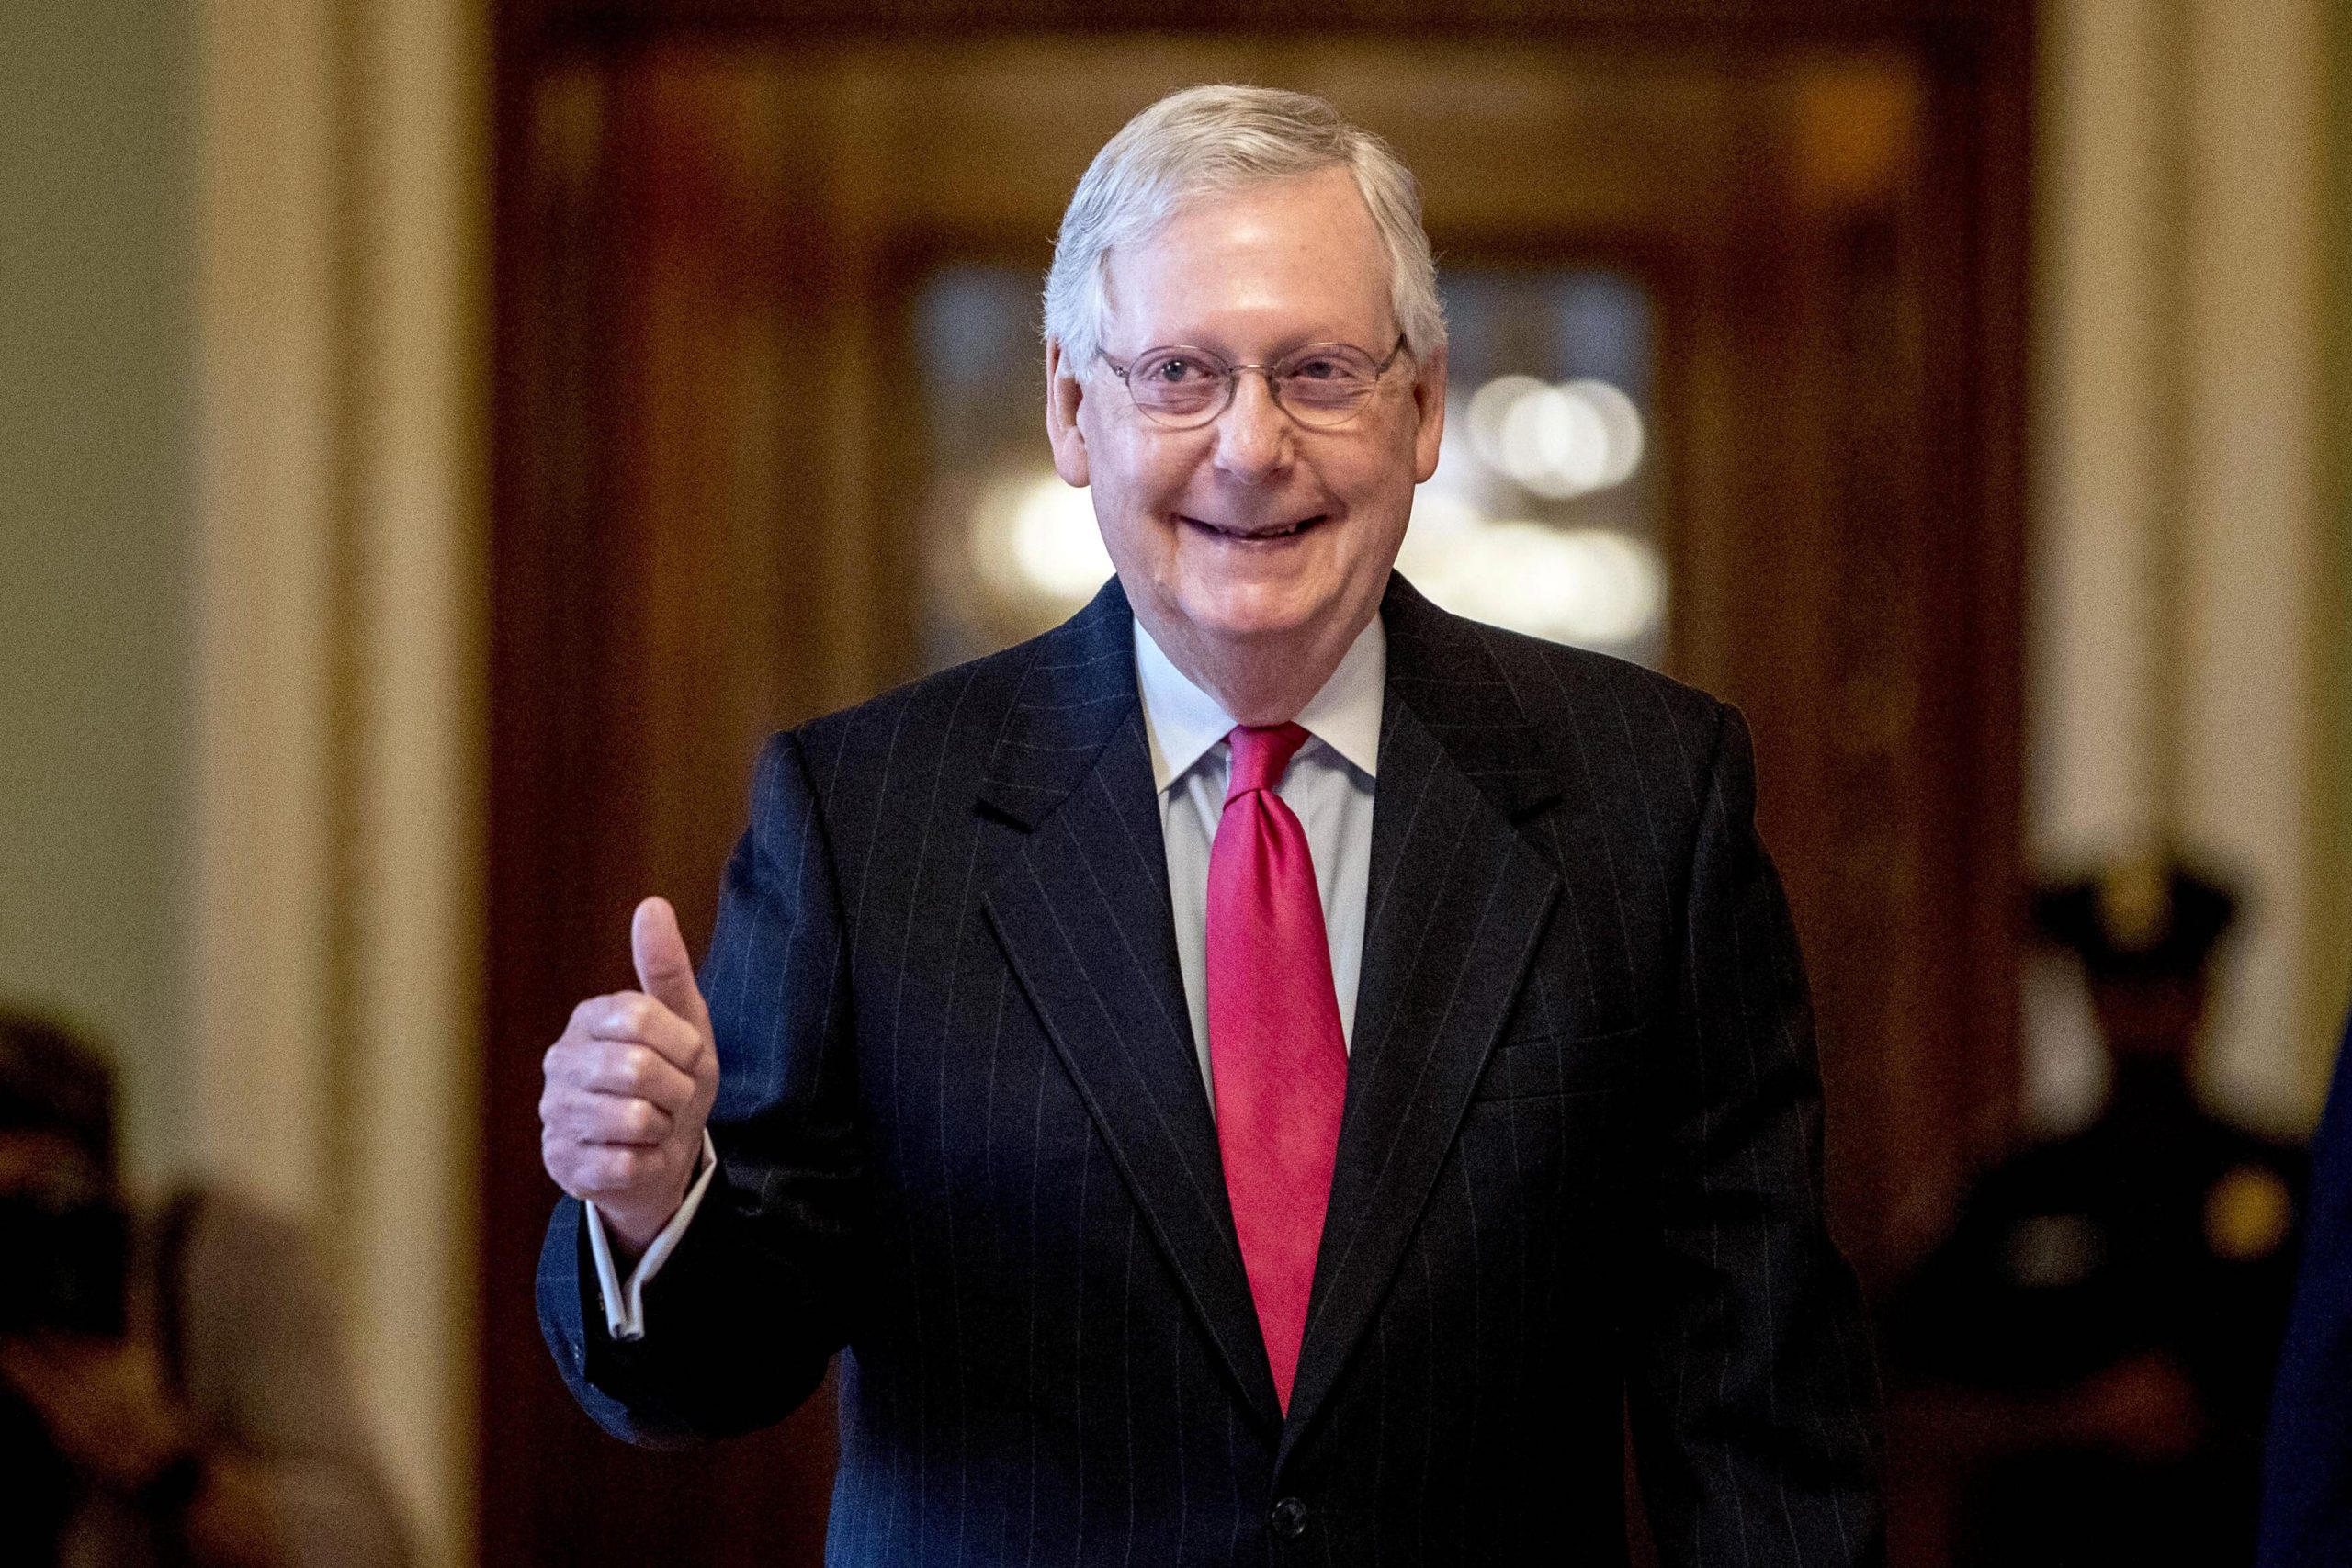 Mitch McConnell wins GOP nomination in bid for 7th term